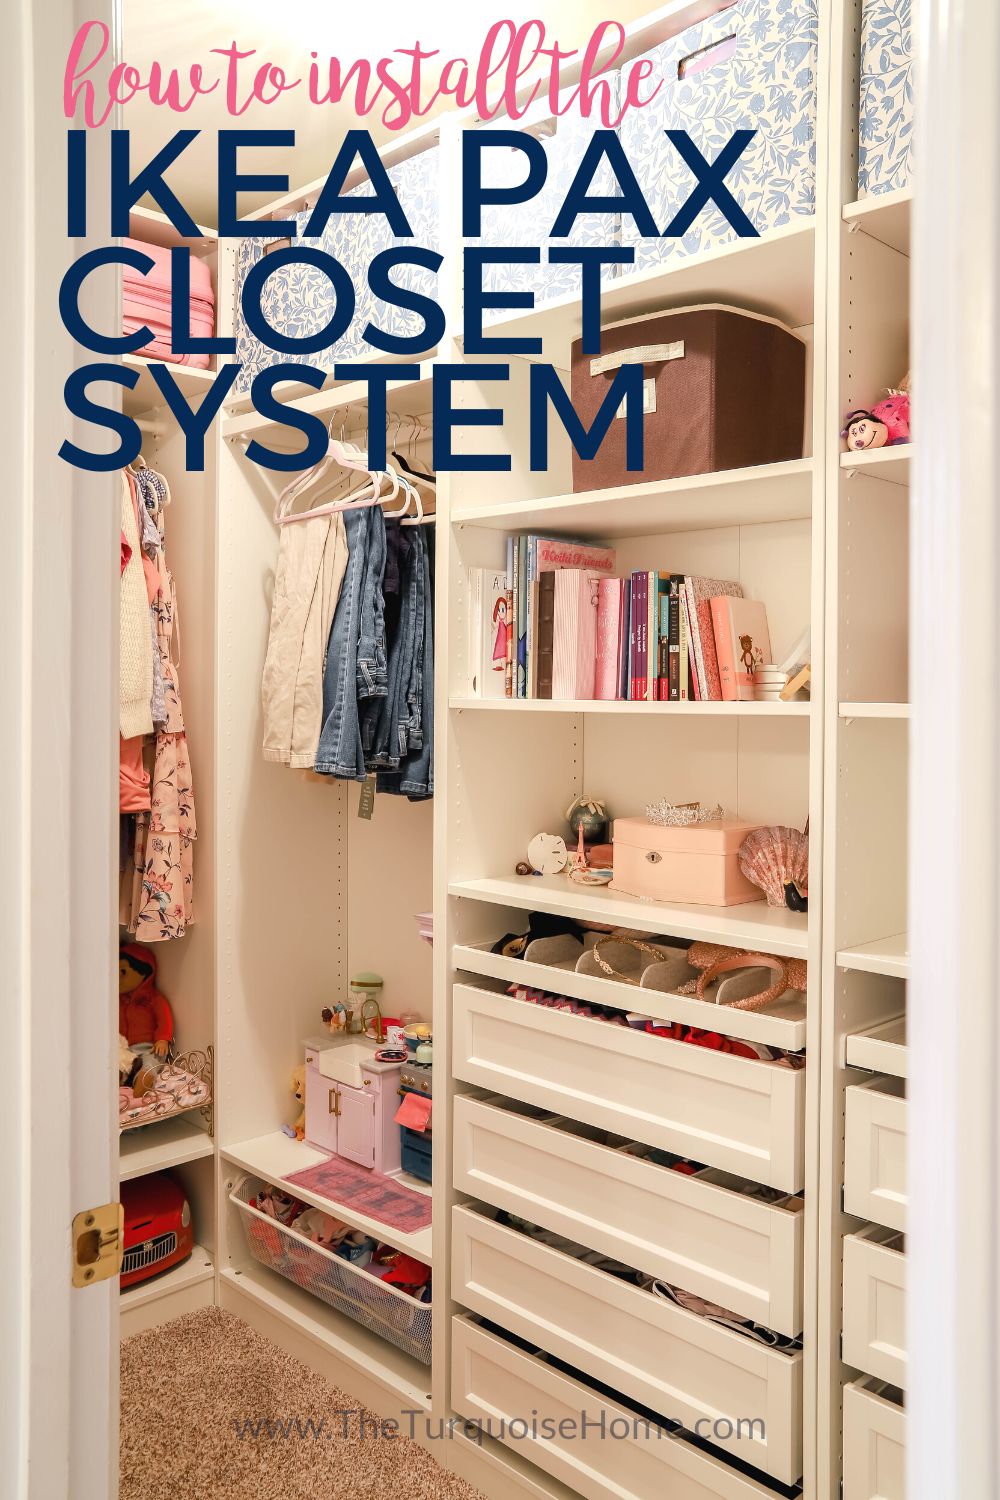 Maximizing Closet Space with IKEA Pax Closet System - The Turquoise Home